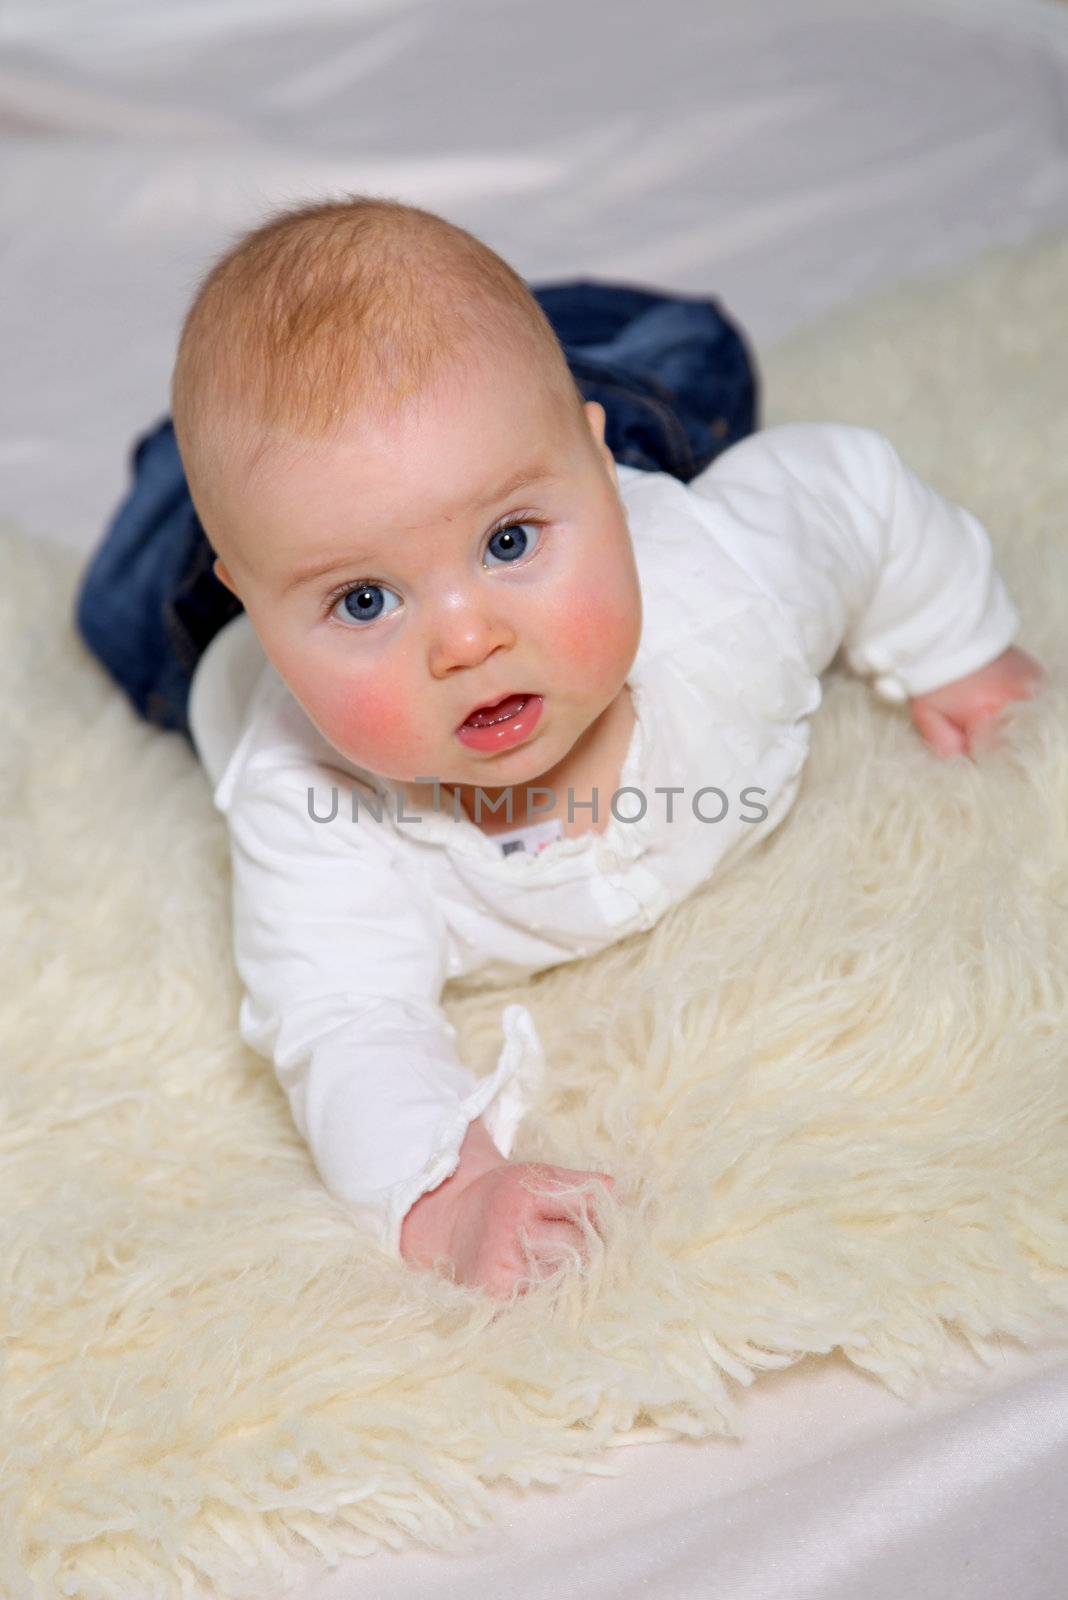 a baby with blue eyes on the belly and looks up into the direction of the camera
